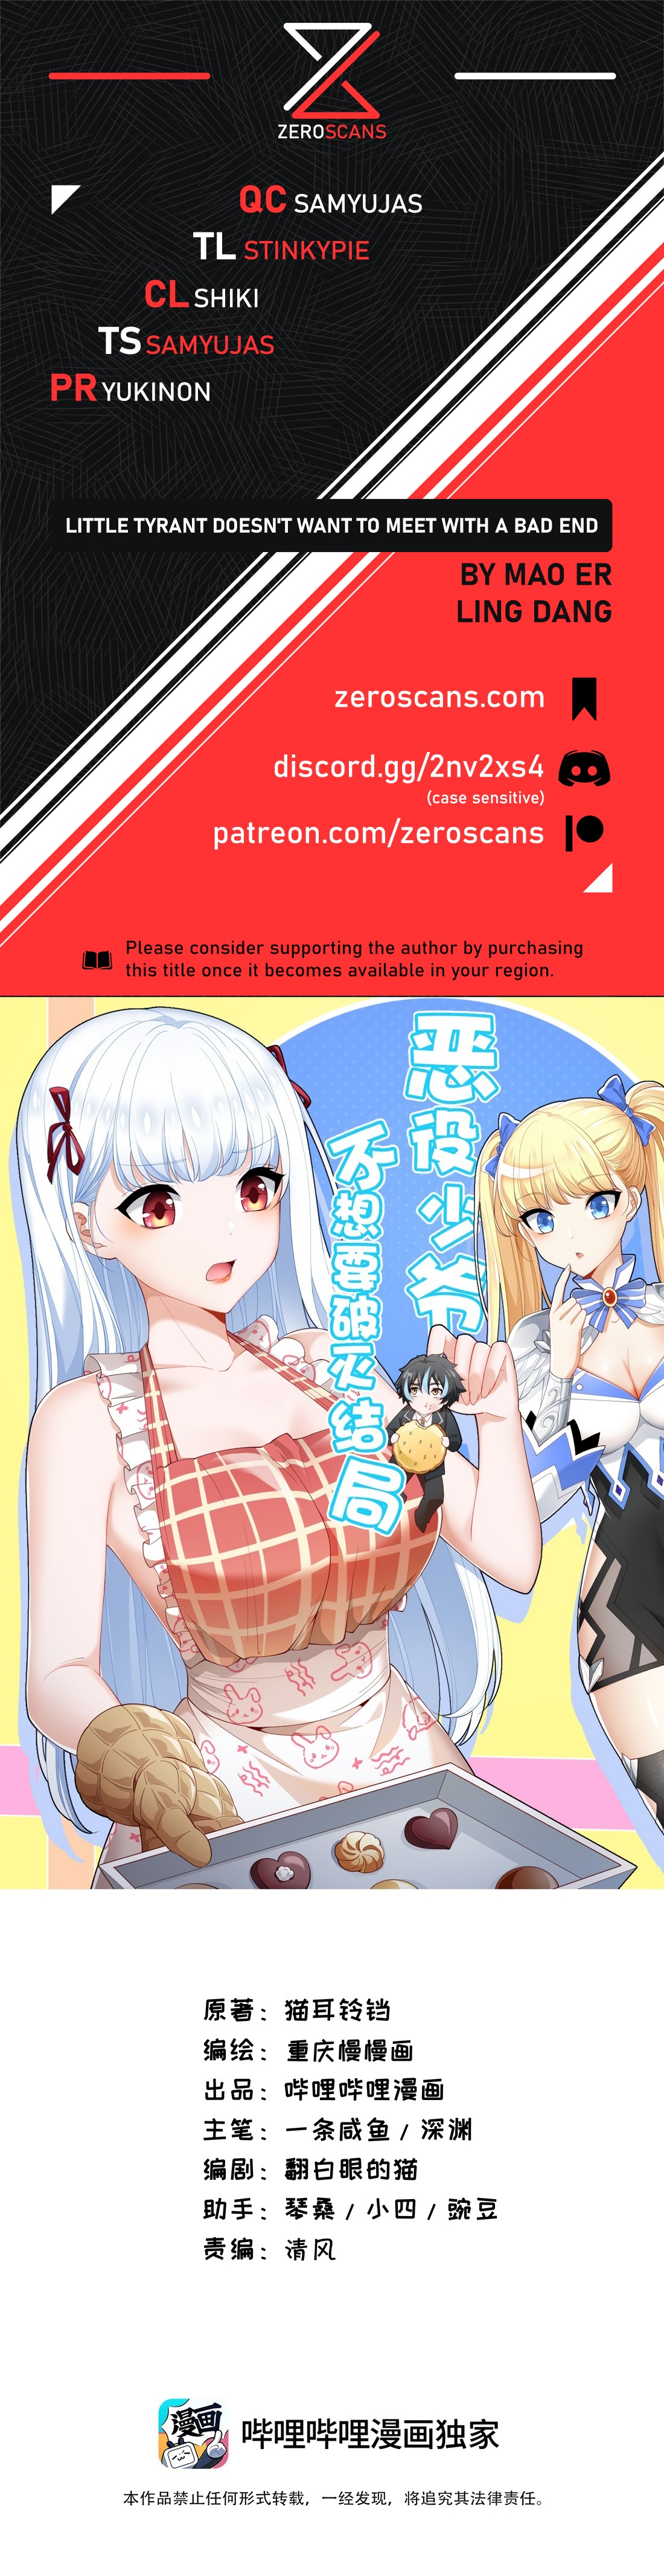 Little Tyrant Doesn't Want to Meet With a Bad End - Chapter 12608 - Little Sister Is Jealous - Image 1